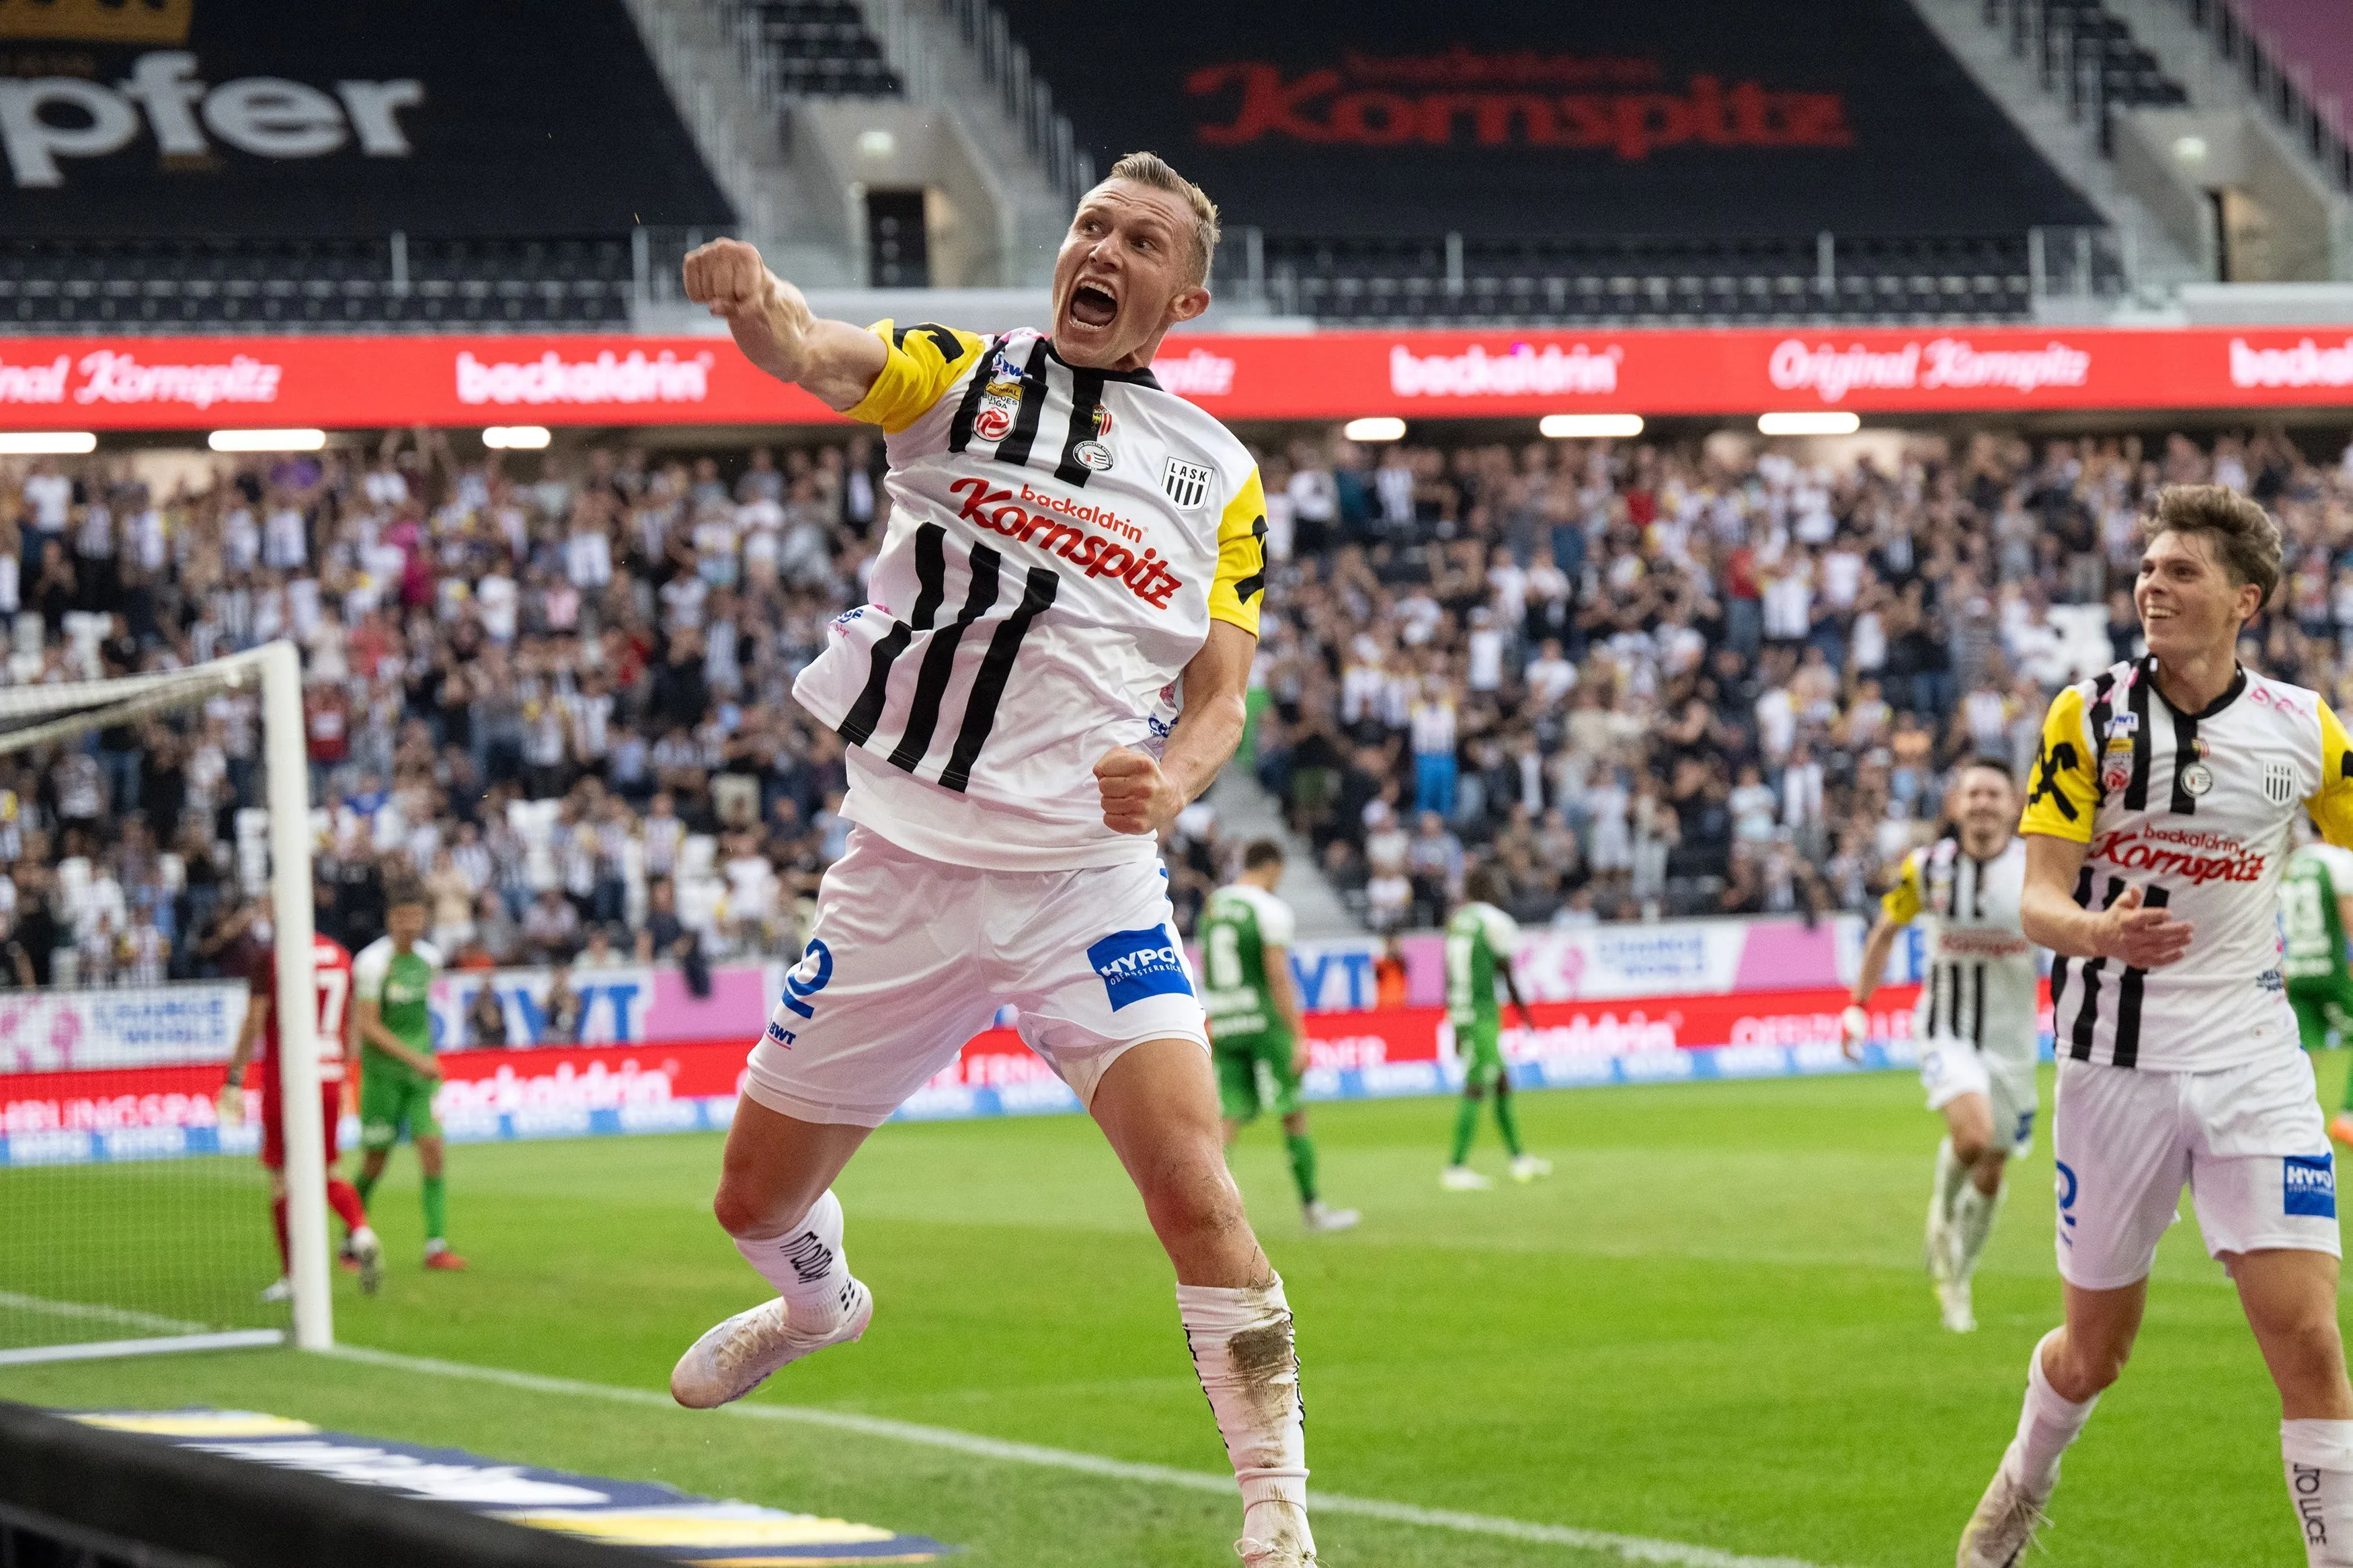 LASK sells itself dearly against Liverpool